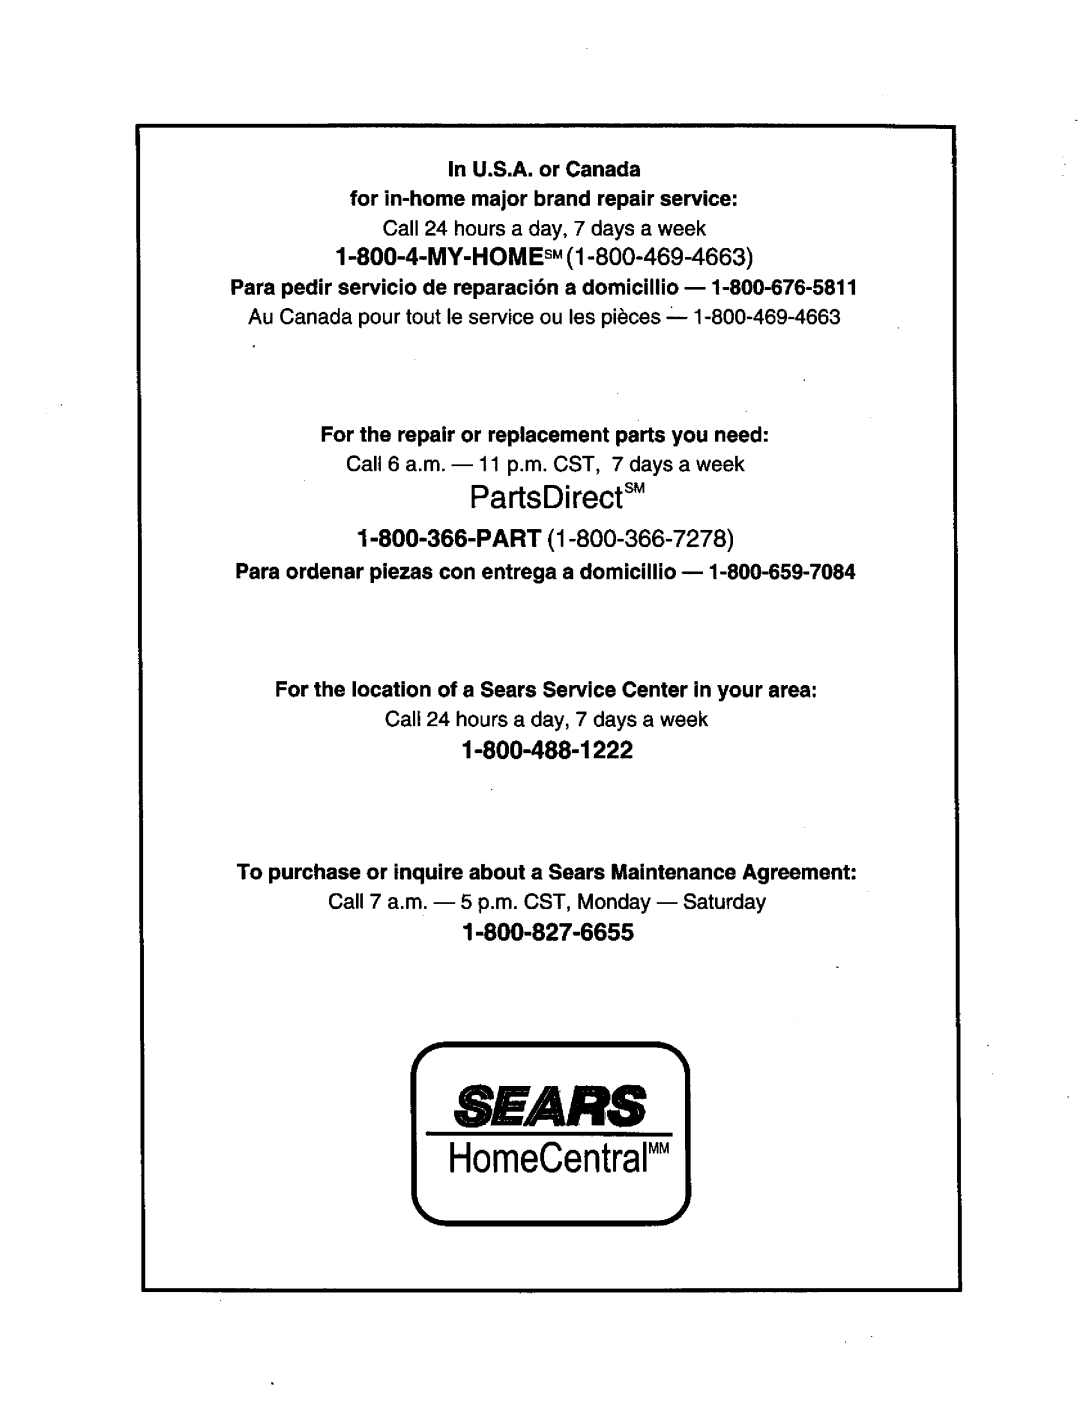 Craftsman 247.388250 owner manual PartsDirect sM, MY-HOME s, 1-800-488-1222, Sears, HomeCentralM, 1-800-827-6655 